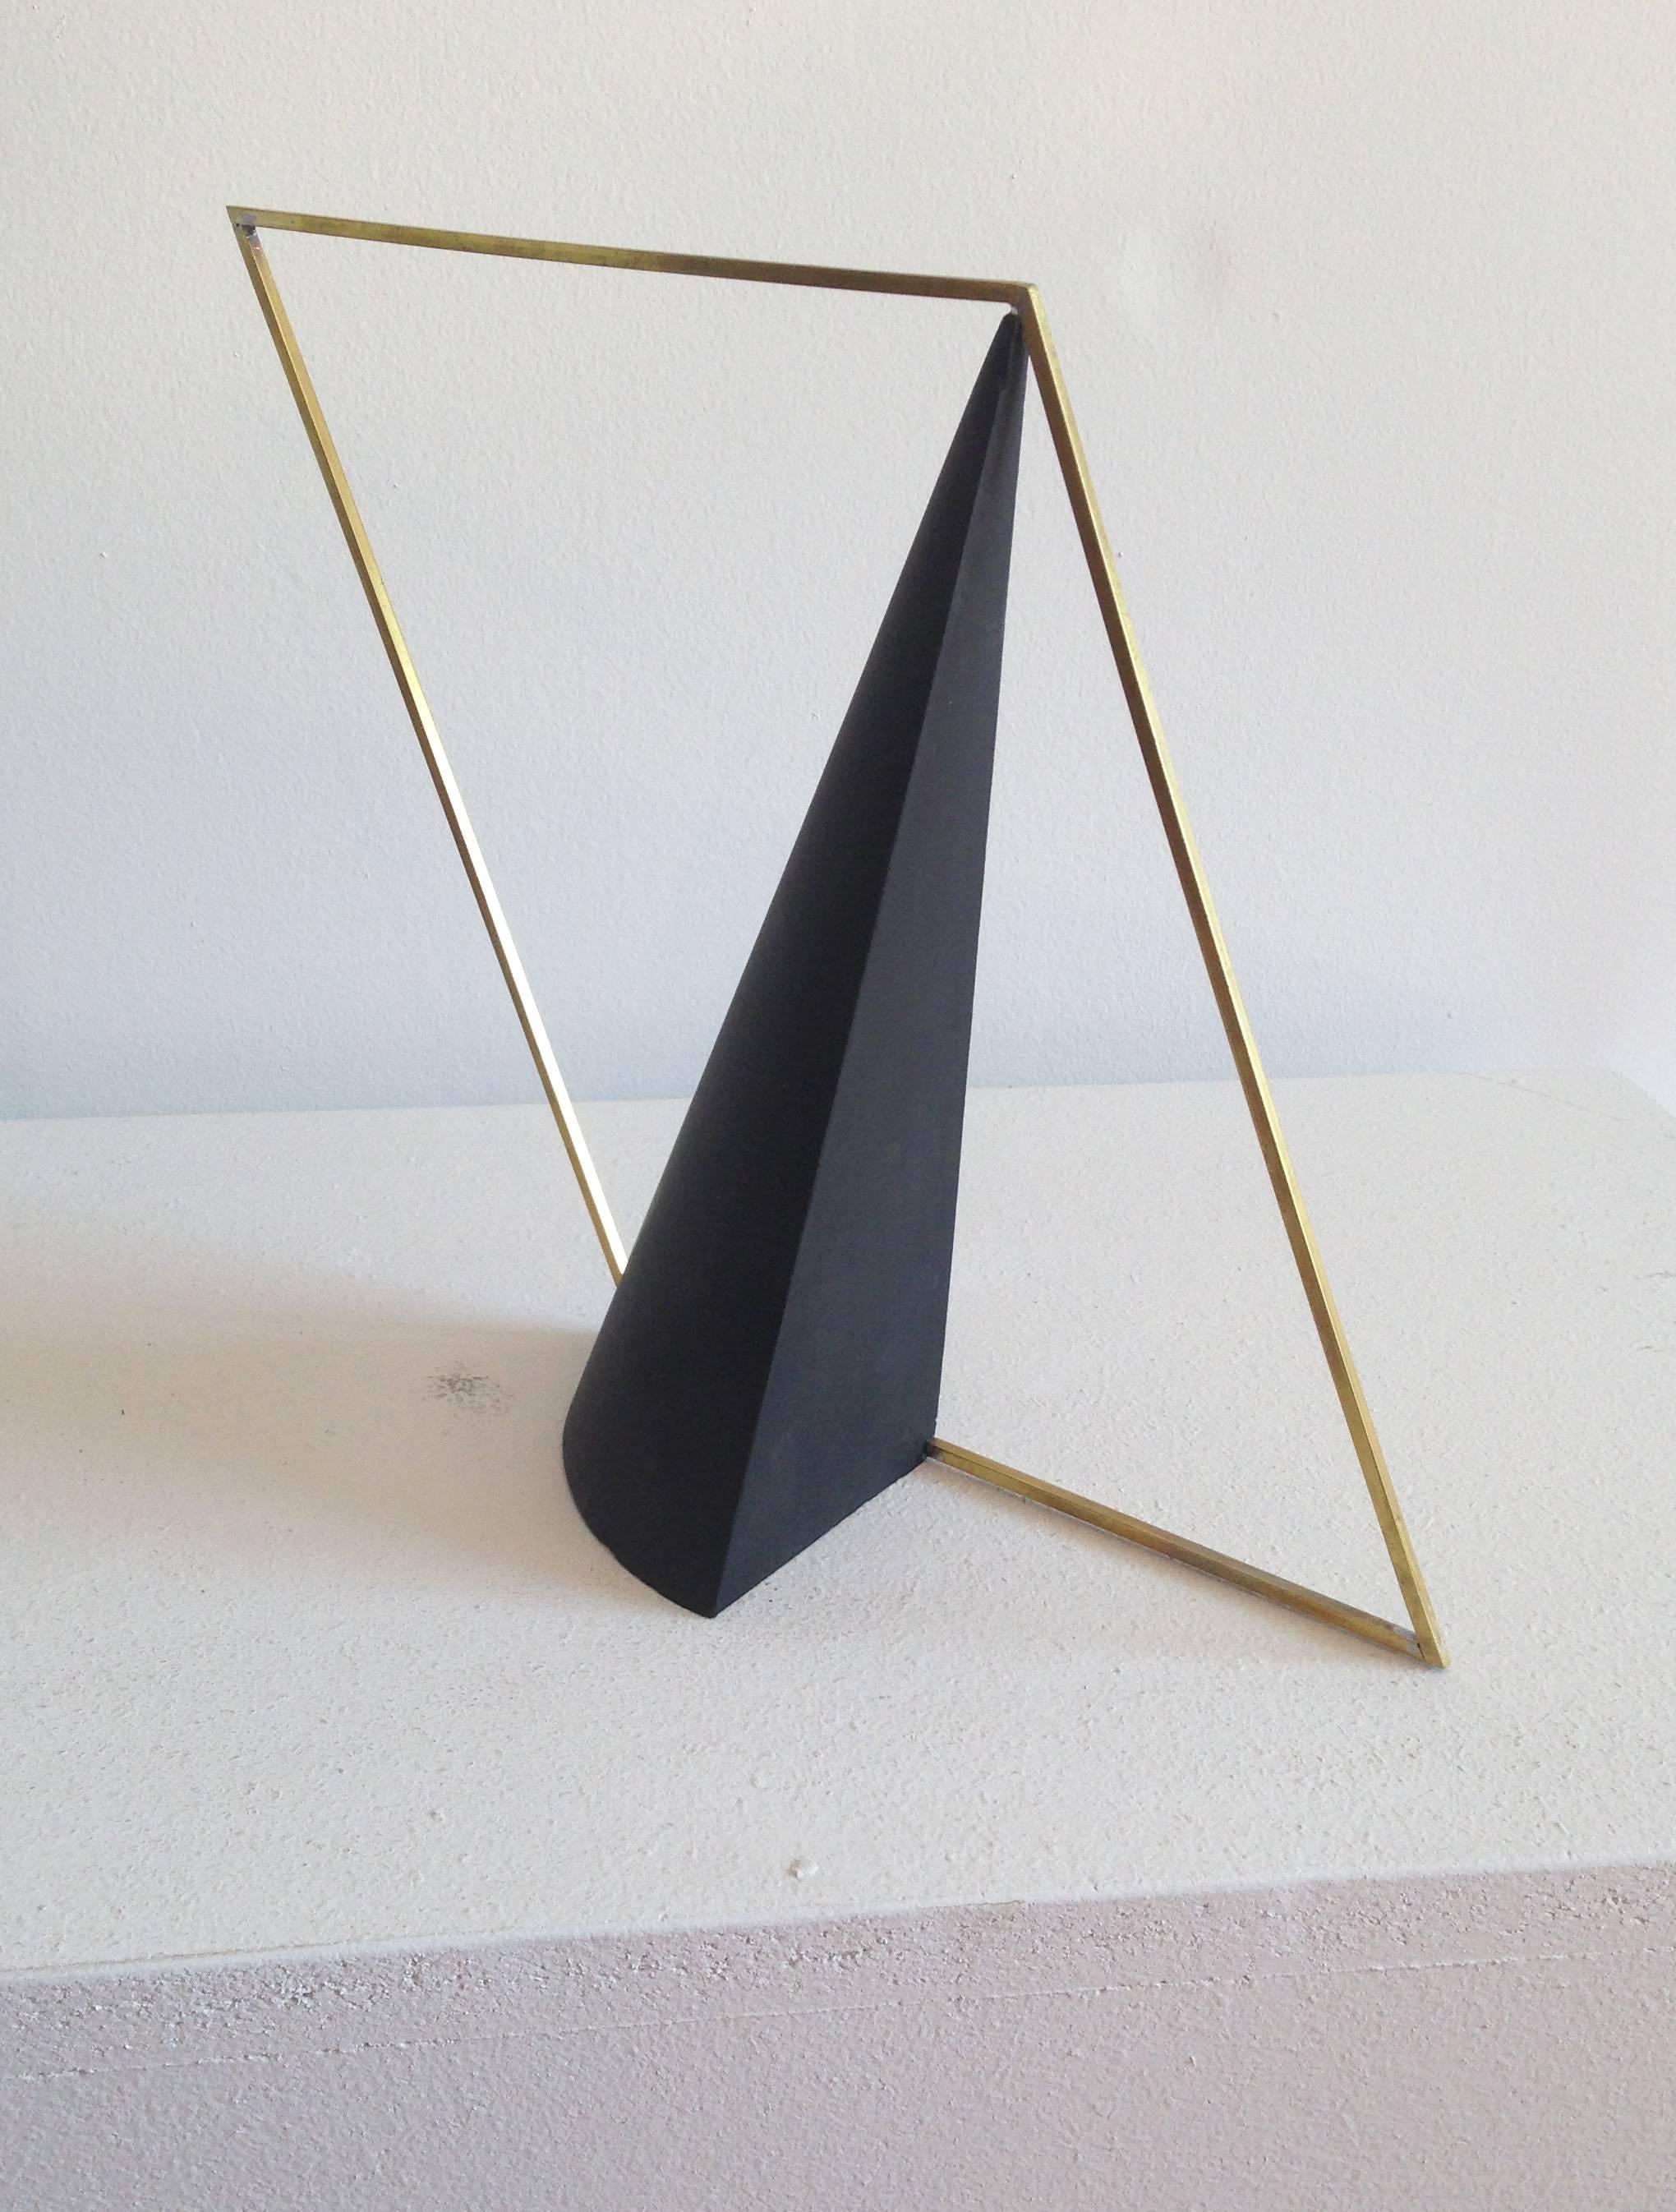 Night Watch (Abstract Mid Century Modern Inspired Small Table Sculpture) - Brown Abstract Sculpture by Leon Smith